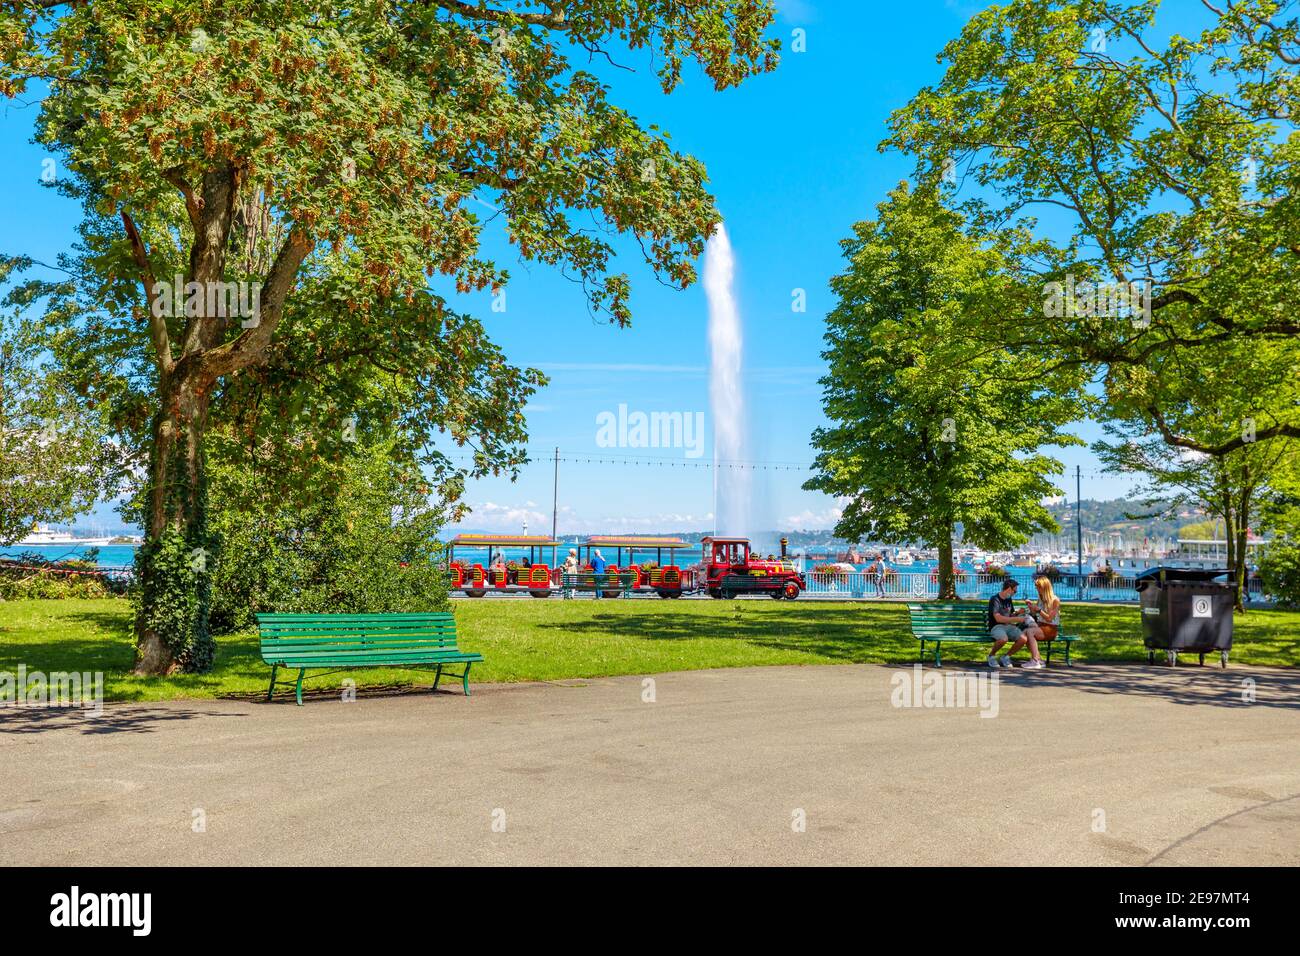 Geneva, Switzerland - Aug 15, 2020: Red tourist train with carriages and locomotive along the promenade du Lac in Jardin Anglais with Jet d'eau Stock Photo